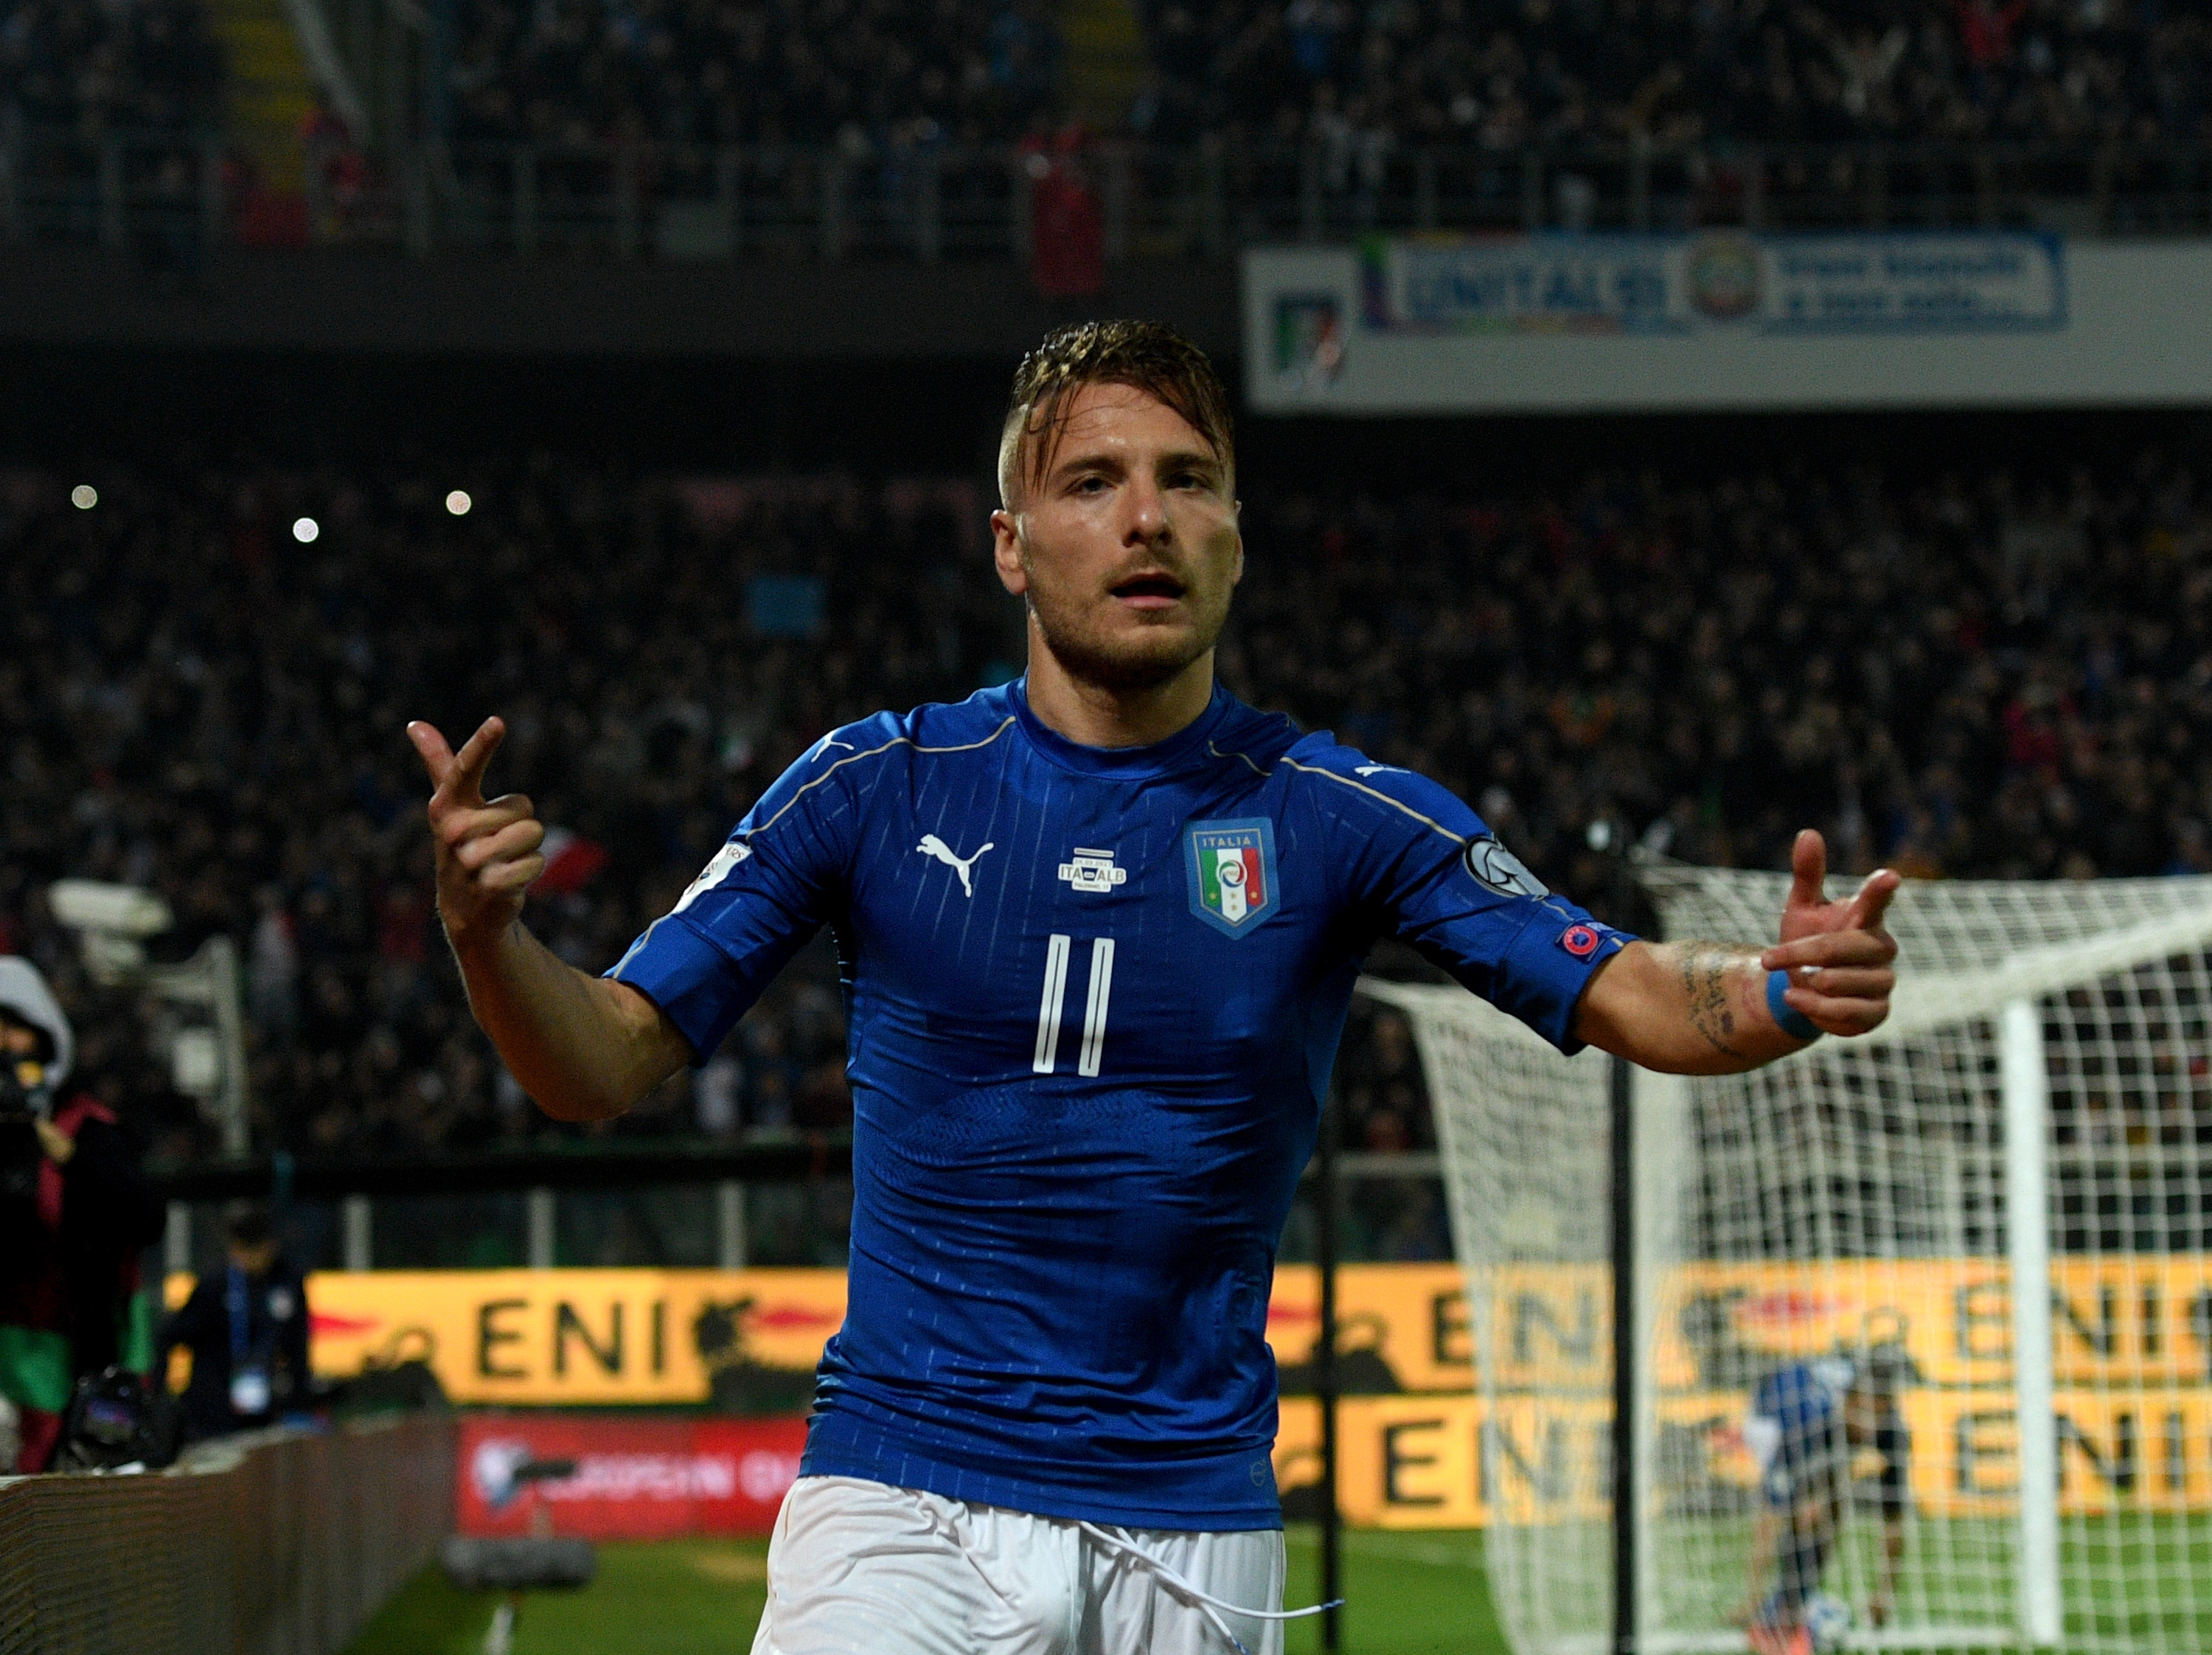 Will Immobile deliver the goods for Italy against England? (Photo by Claudio Villa/Getty Images)